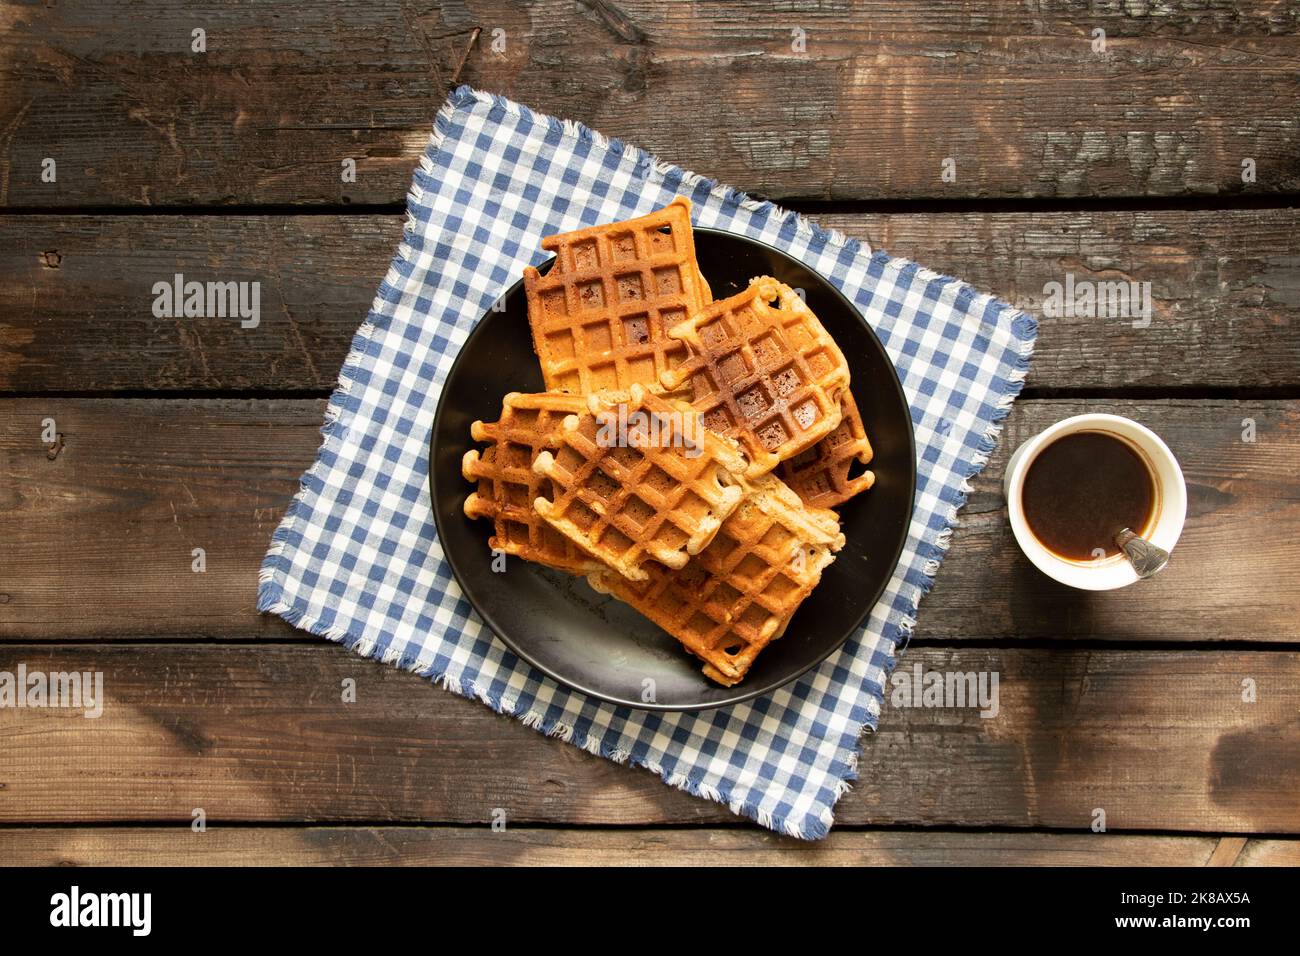 Viennese waffle on a wooden table and a cup with coffee, waffles for breakfast in the kitchen at home Stock Photo